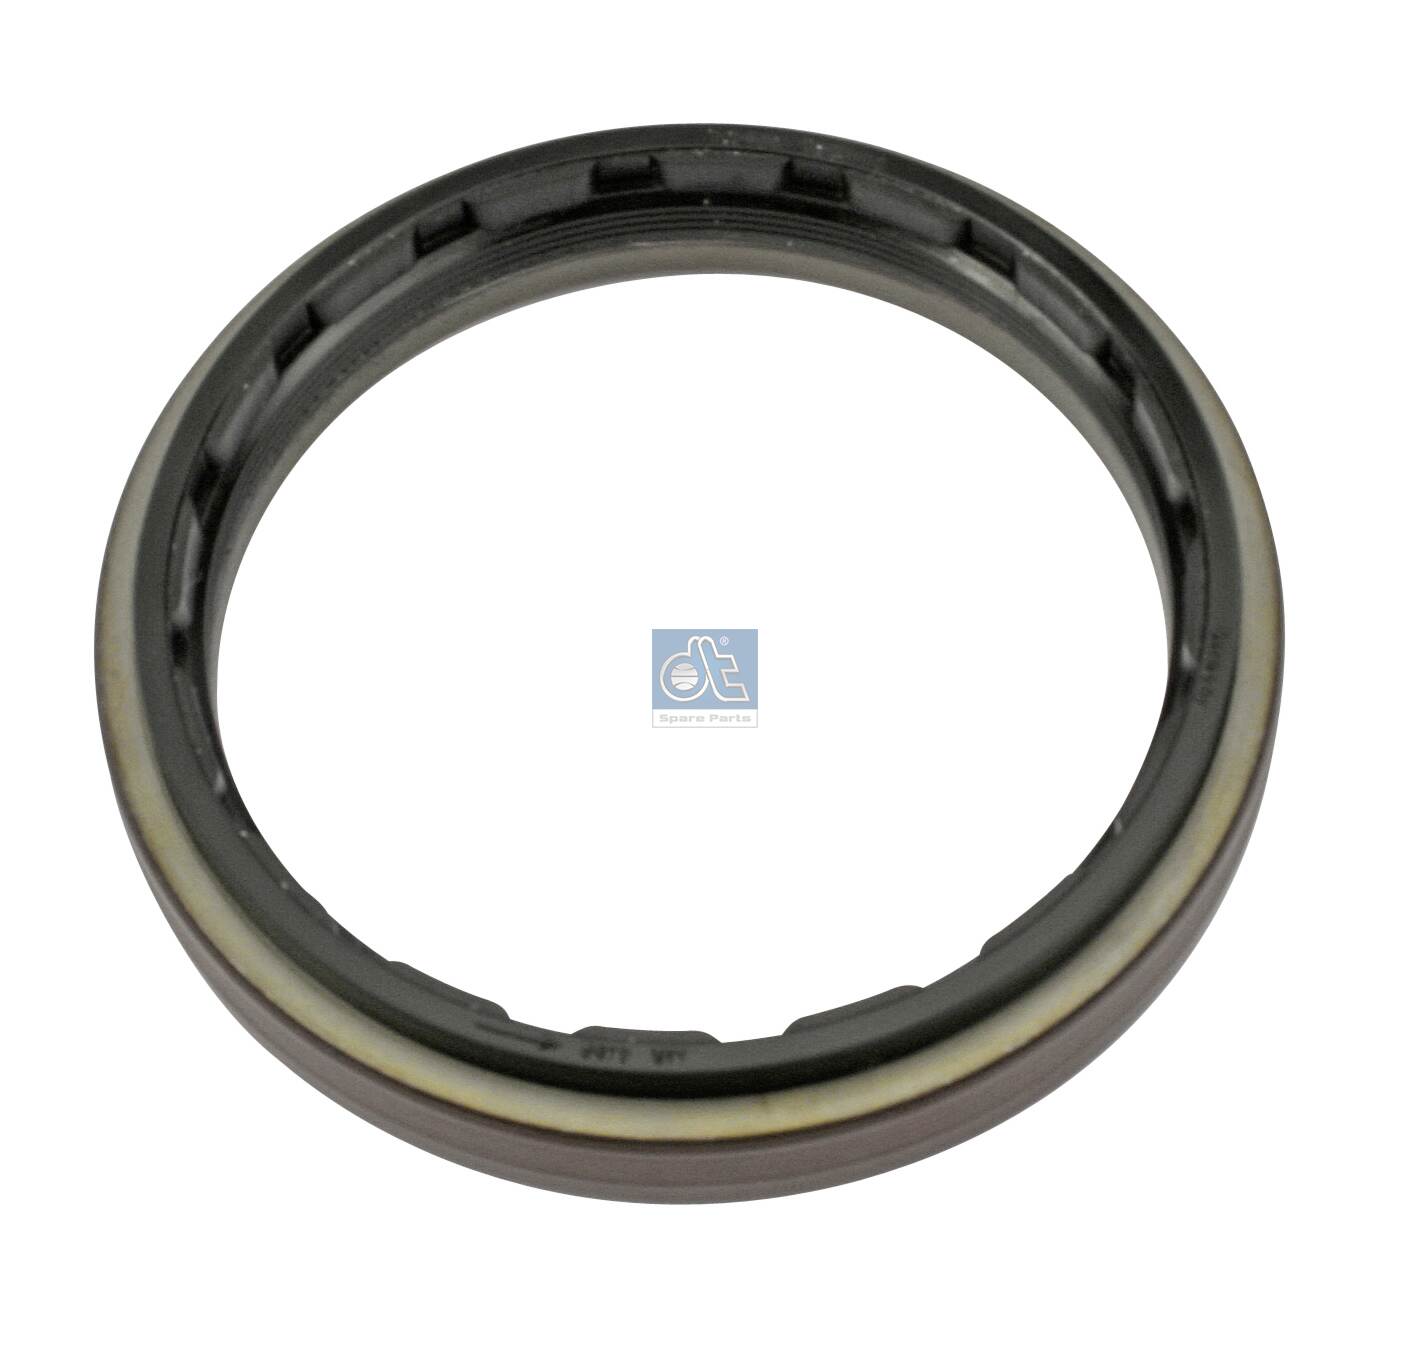 1.16046, Shaft Seal, differential, DT Spare Parts, 1380160, 1393331, 1502384, 502384, 041.144, 04.24.083, 111373, 120.146-00A, 12014704, 12017404, 139.568, 15837, 18796, 222.640, 69296, 12018654, 1256163, 74.53.0281, 12018654B, 63330, S1380160DIC, 63330/1, 82018654, S1380160DPH, 006232, S1393331MOS, PB-331, PB-384, K06.02650, T46495